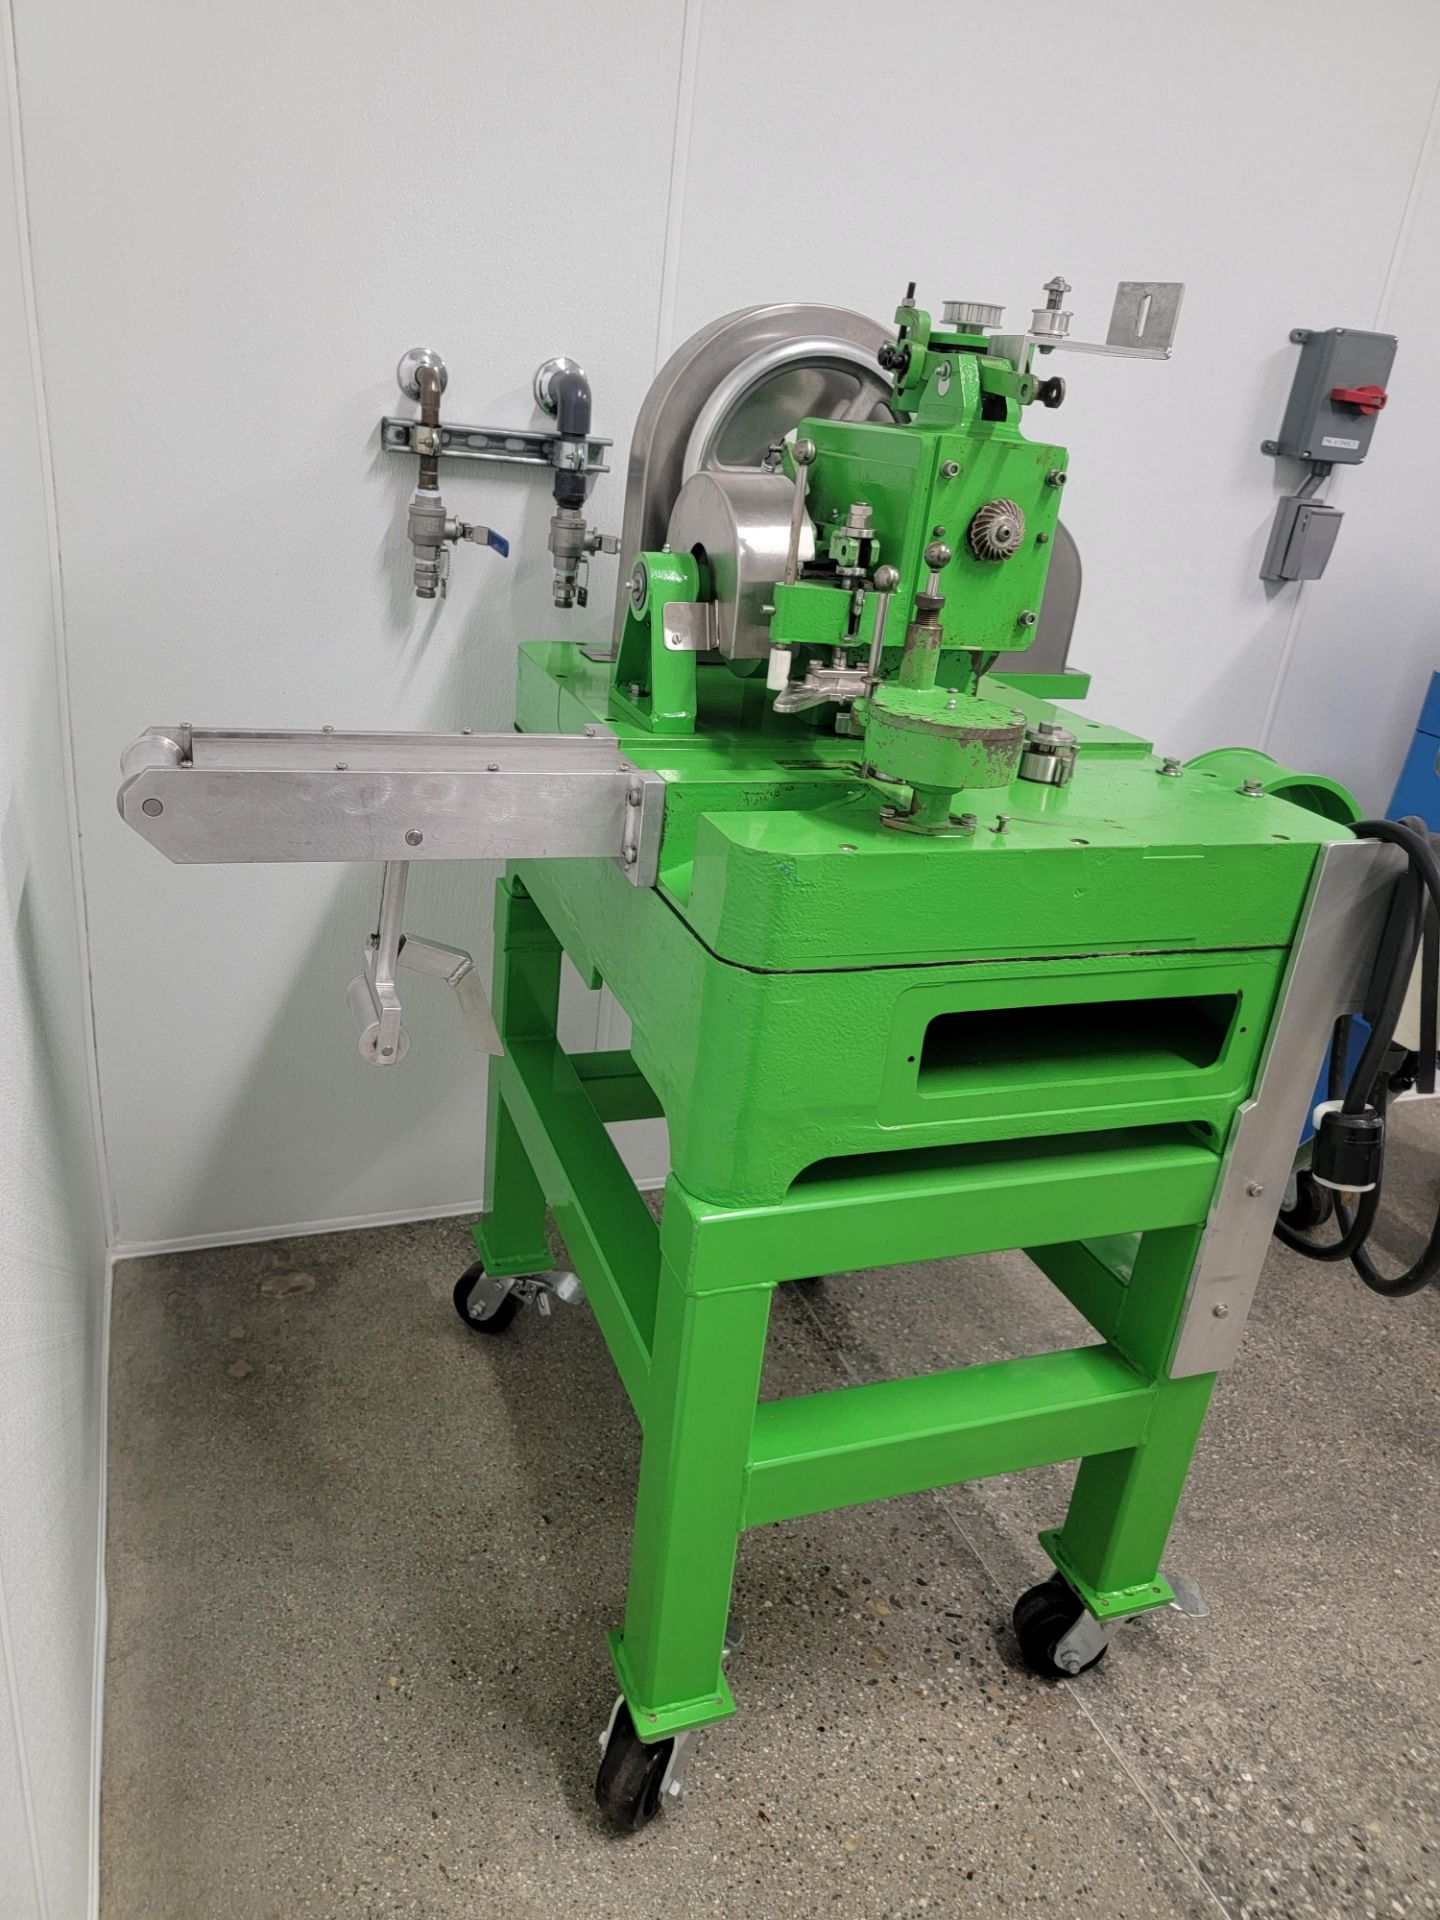 COLTON SINGLE PUNCH TABLET PRESS (TRITULATOR) GREEN - Image 4 of 5